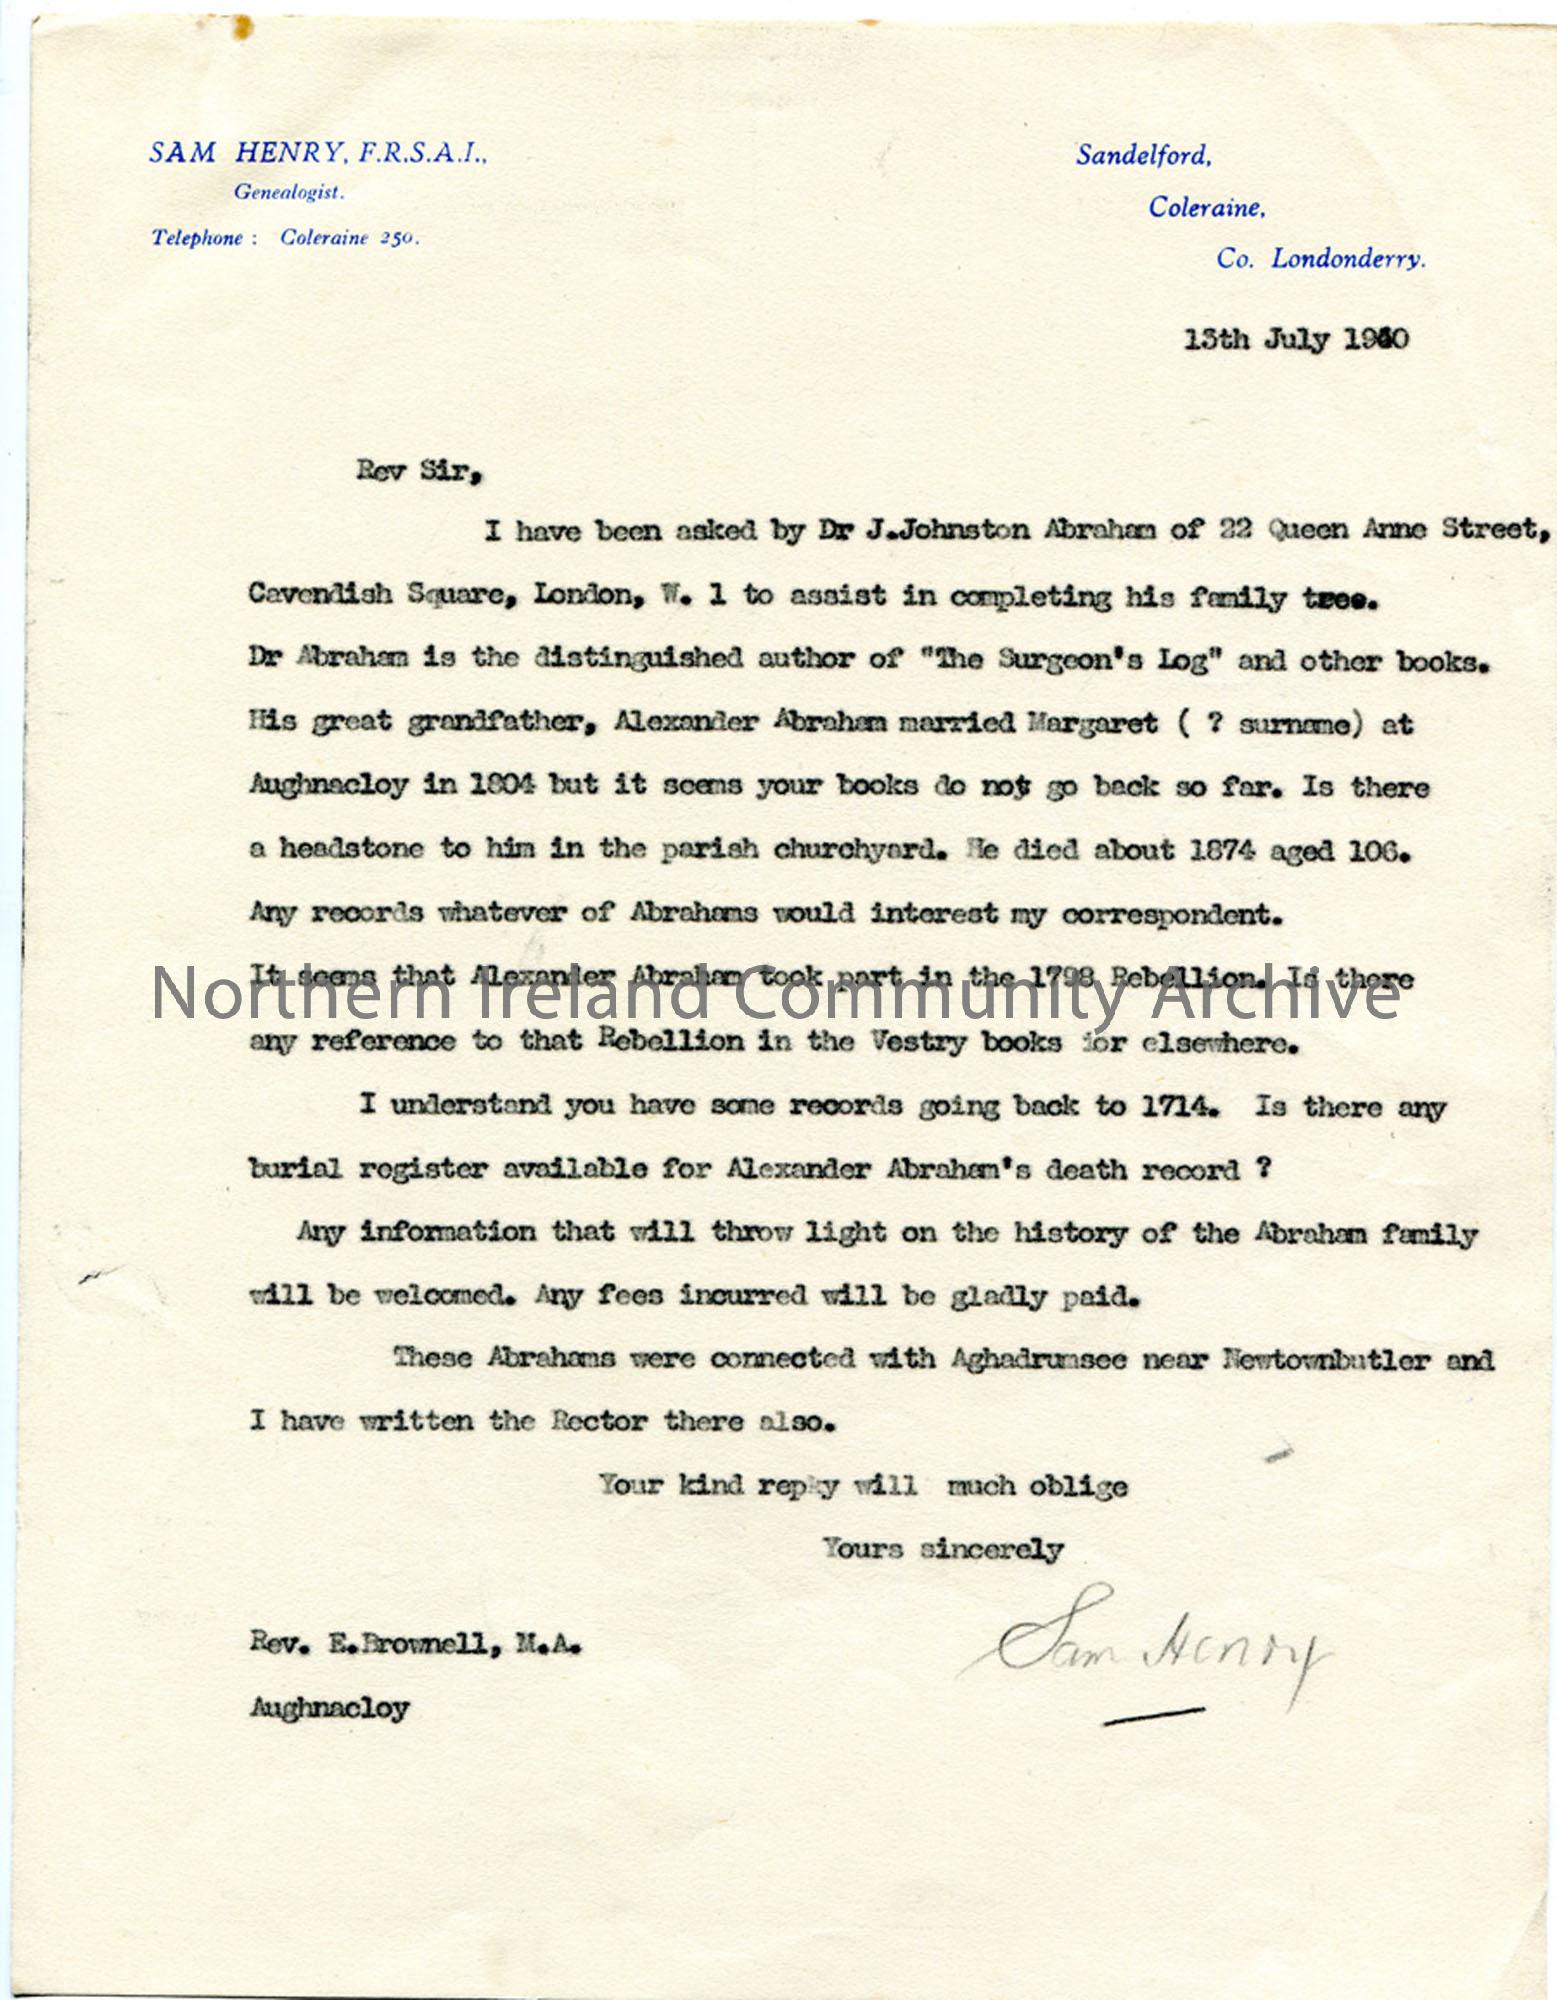 Letter to Rev. E. Brownell 13.7.1940